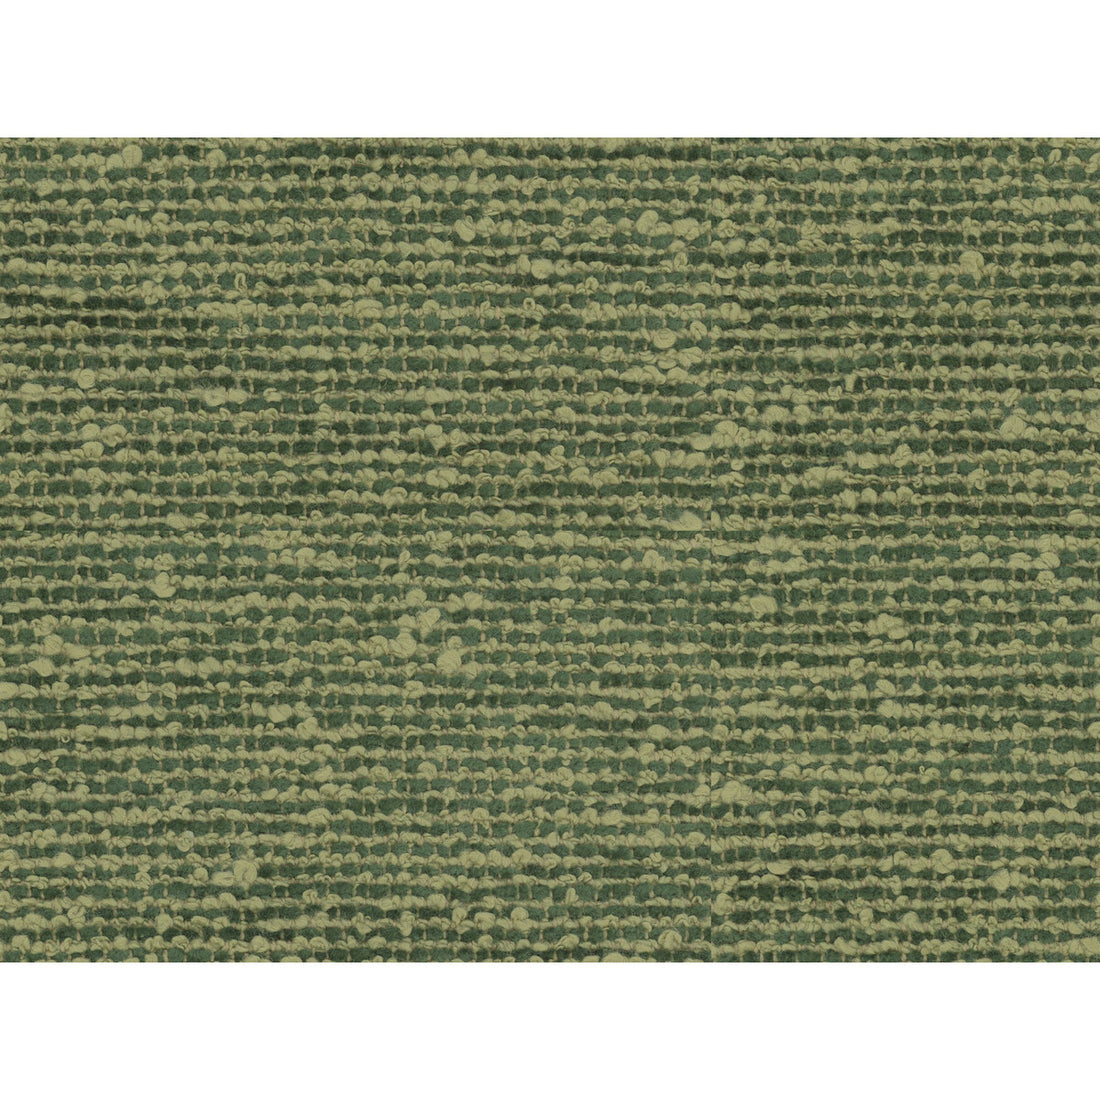 Vanoise Chenille fabric in avocado color - pattern 8016104.33.0 - by Brunschwig &amp; Fils in the Chambery Textures collection